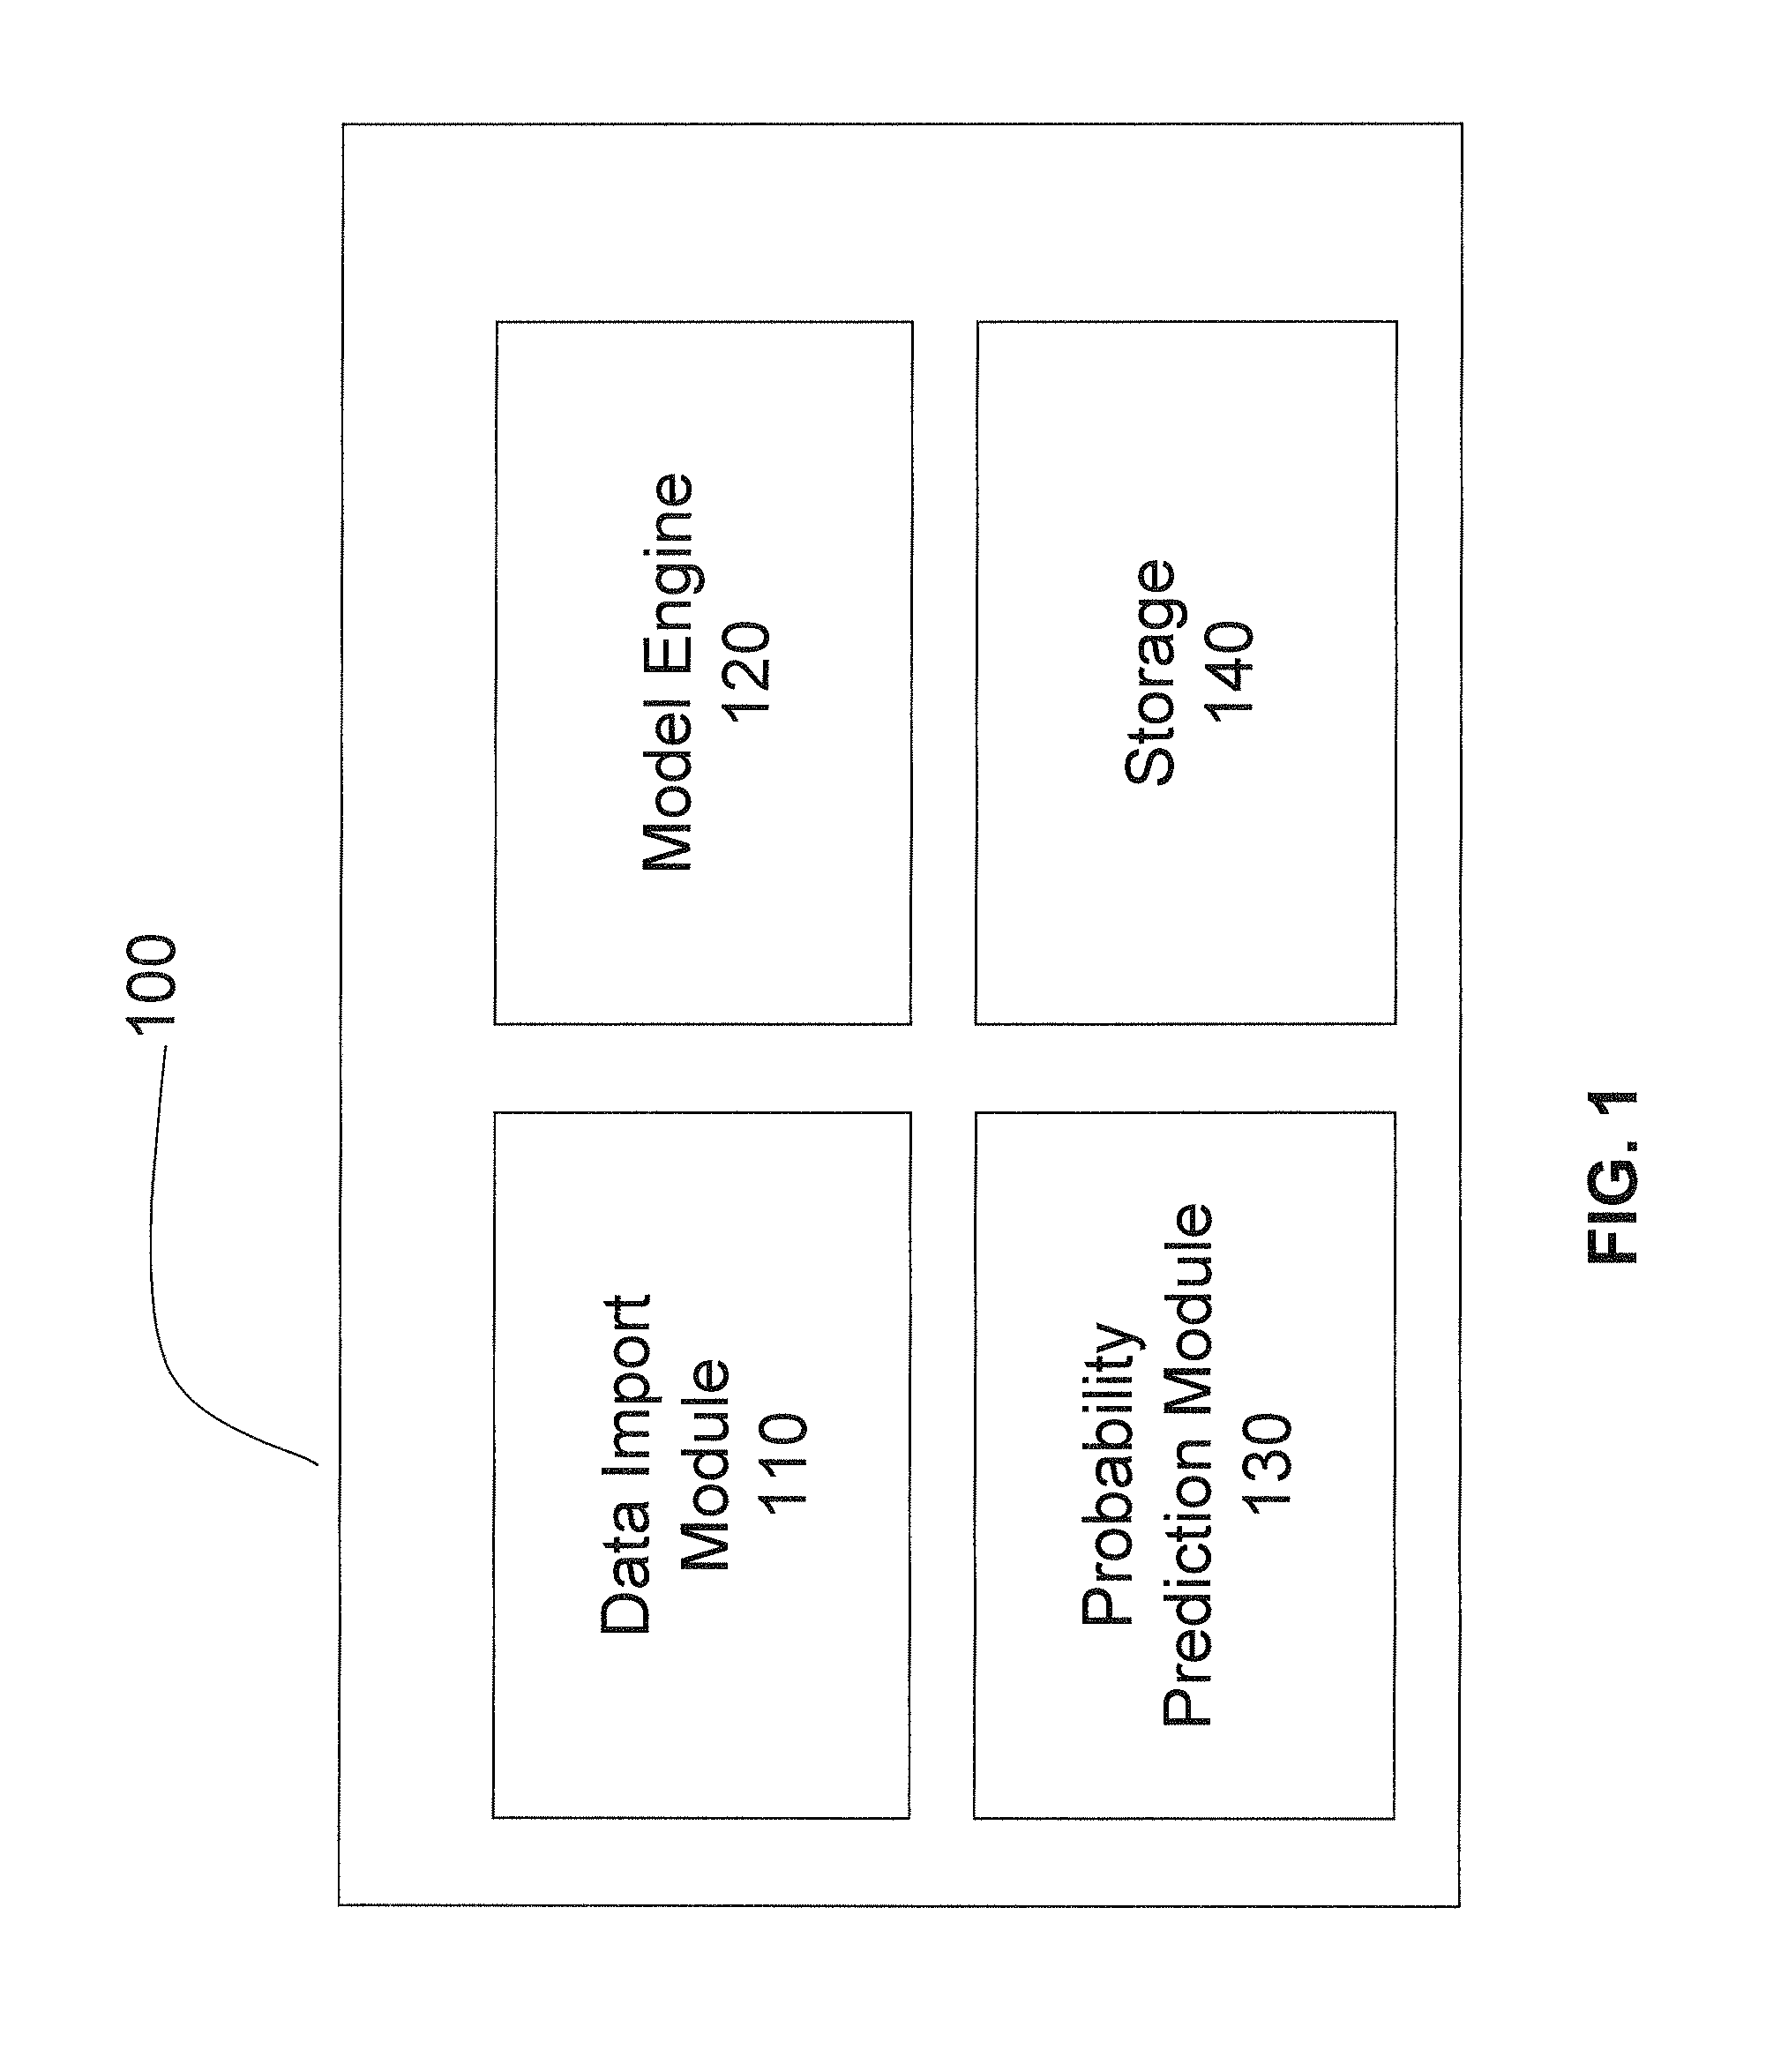 Apparatus and method for modeling loan attributes